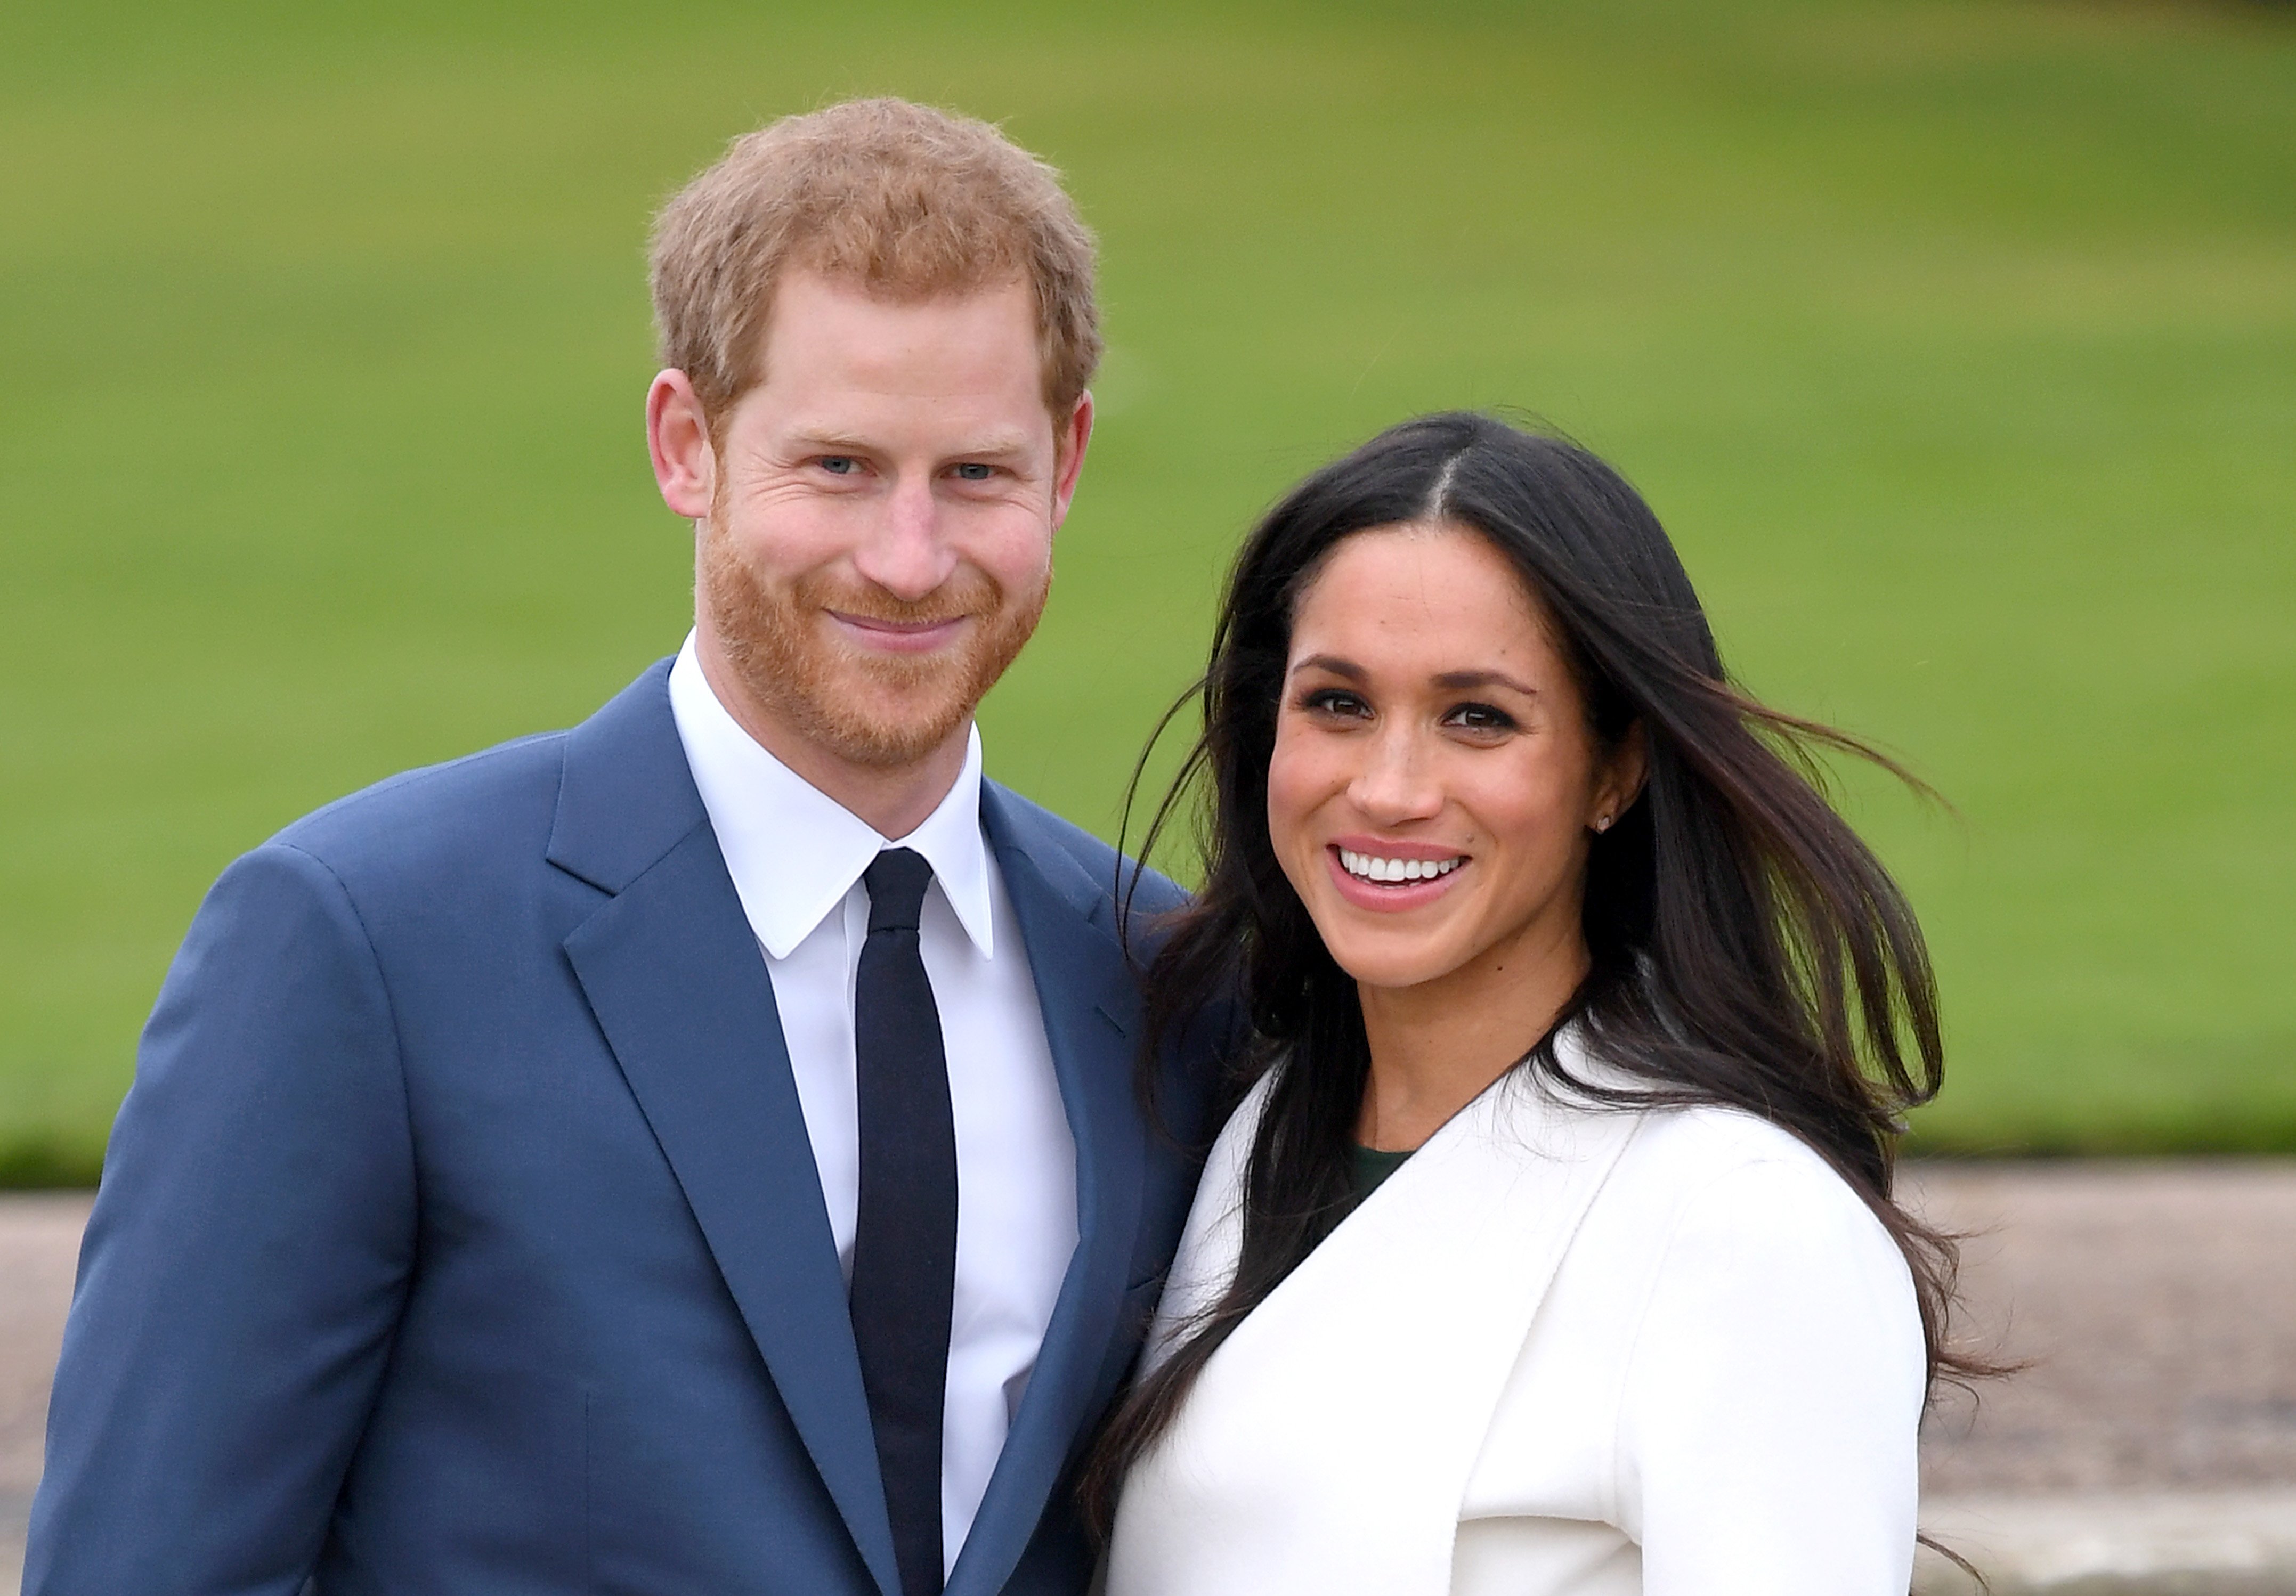 Prince Harry and Meghan Markle pictured the photocall to announce their engagement in 2017, London, England. | Photo: Getty Images